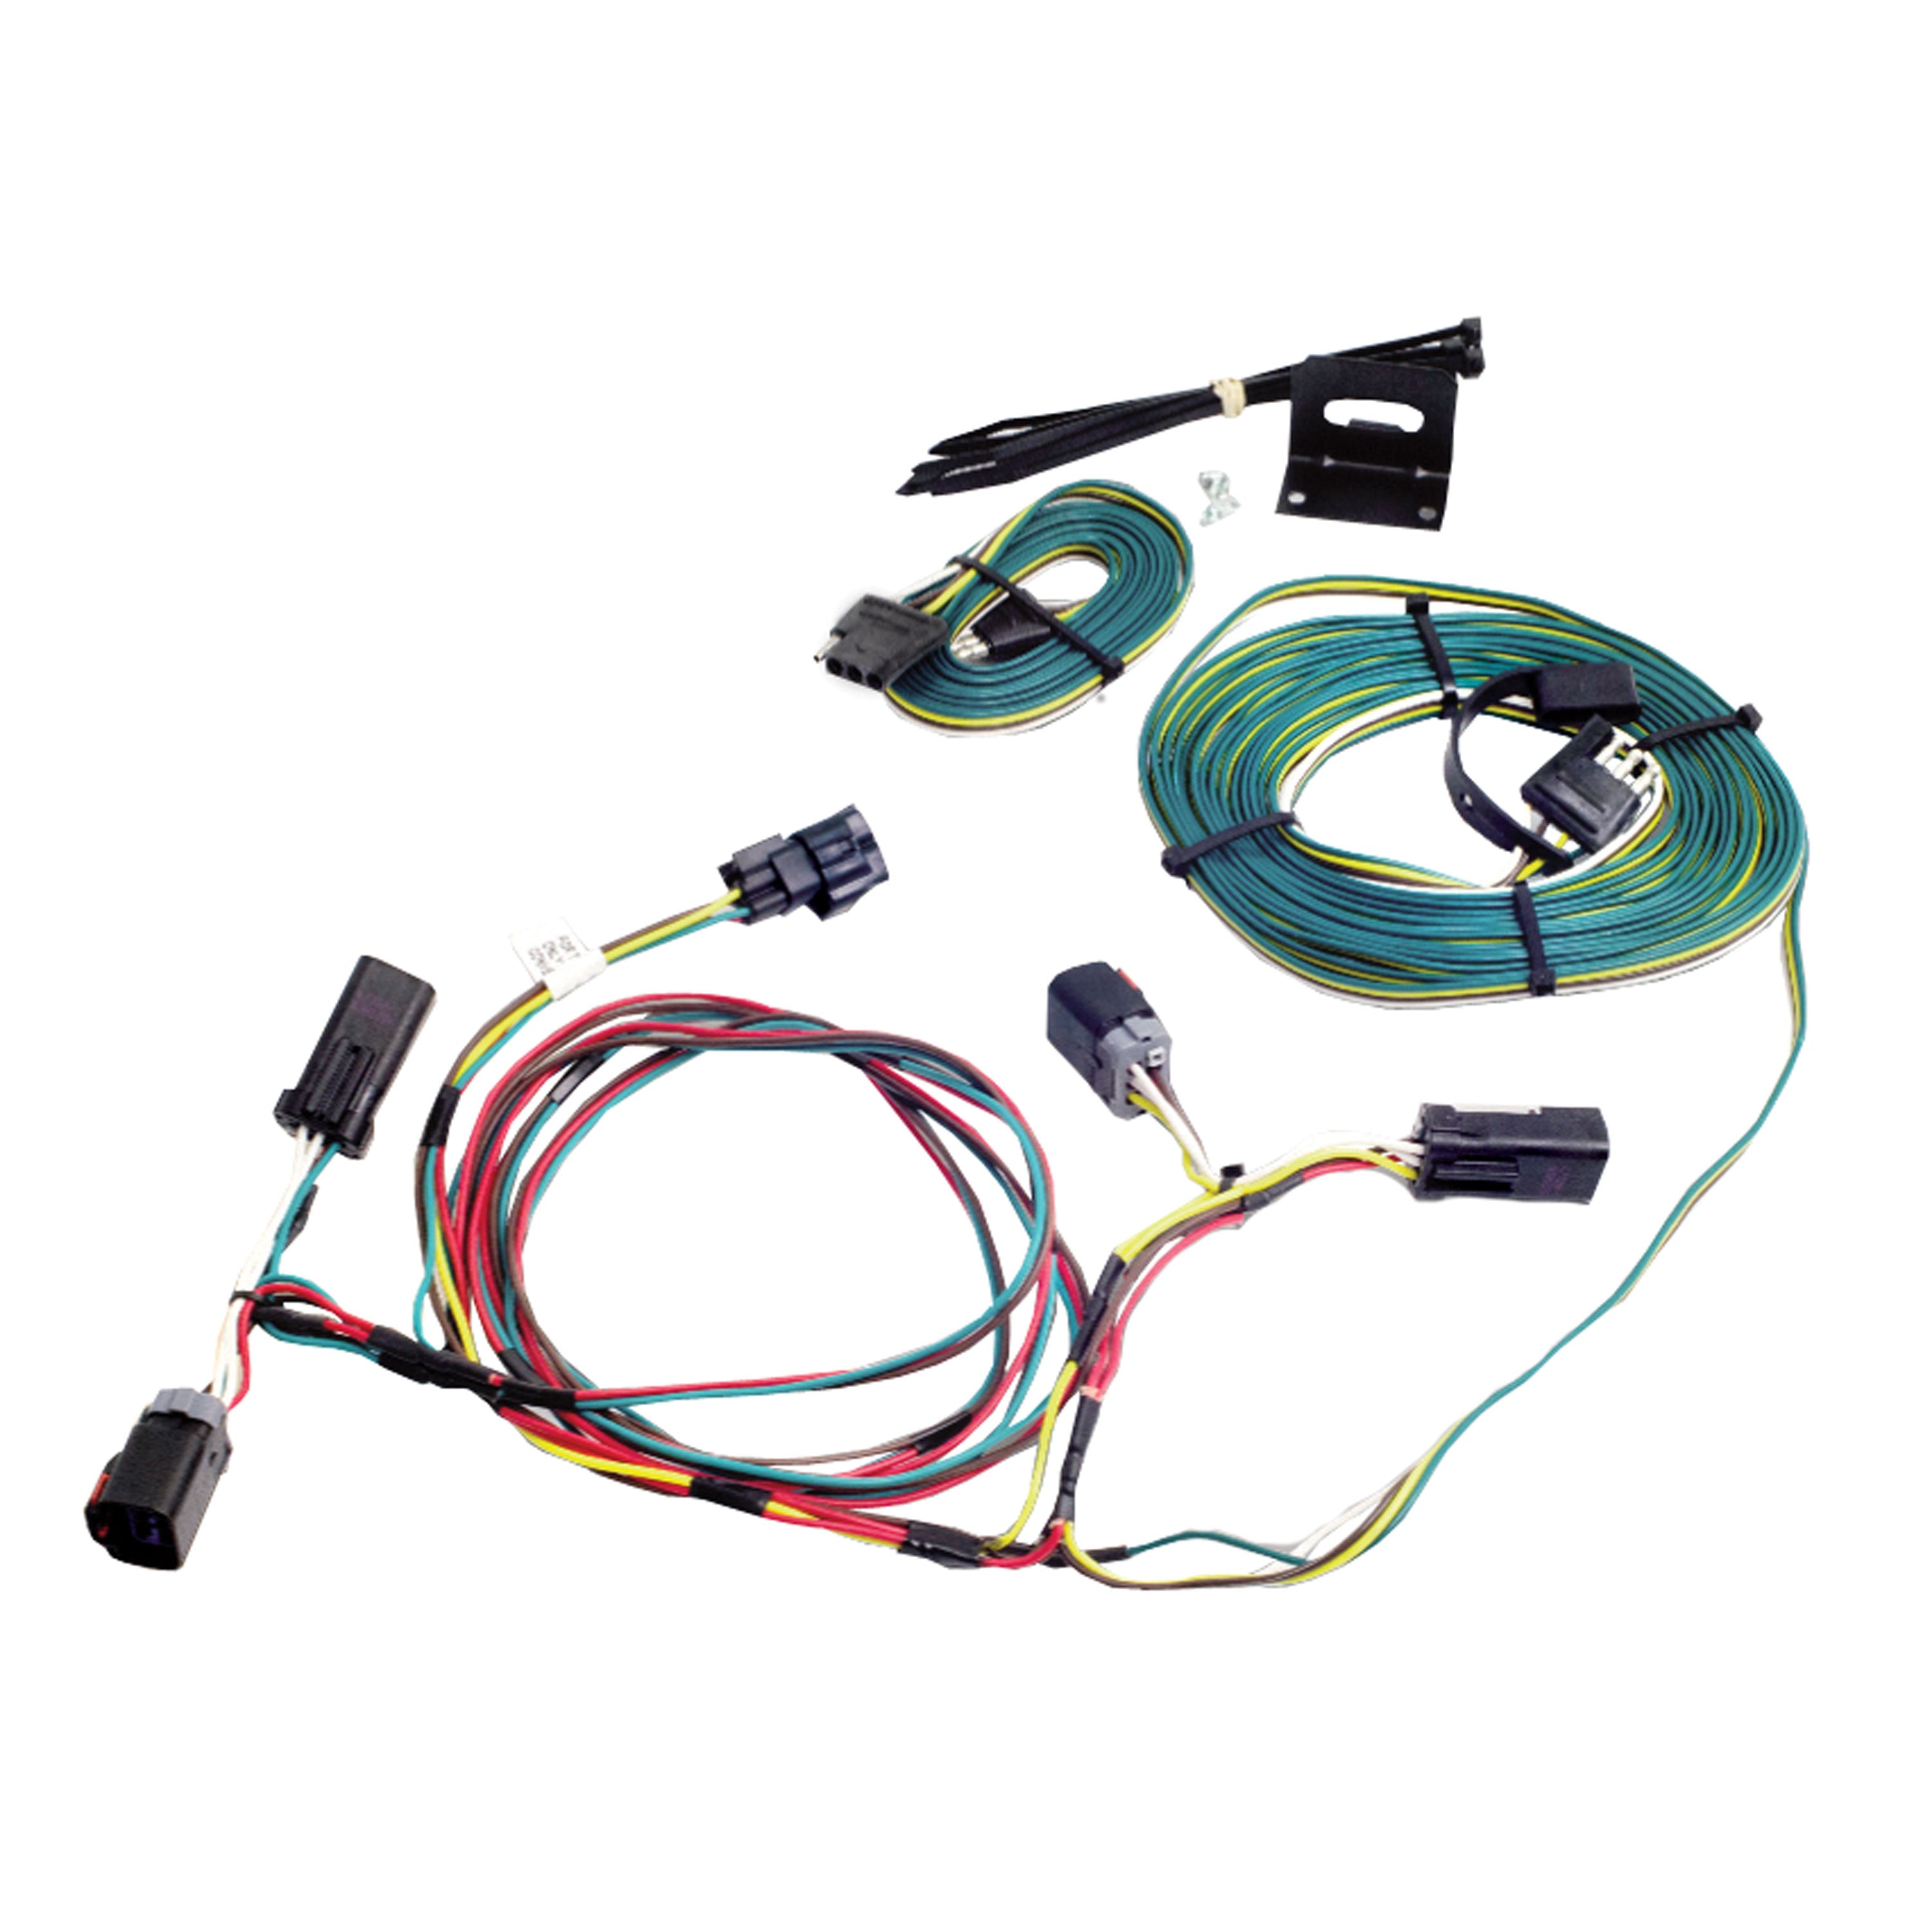 Demco 9523071 Towed Connector Vehicle Wiring Kit - For Select Buick/Chevy/GMC/Oldsmobile